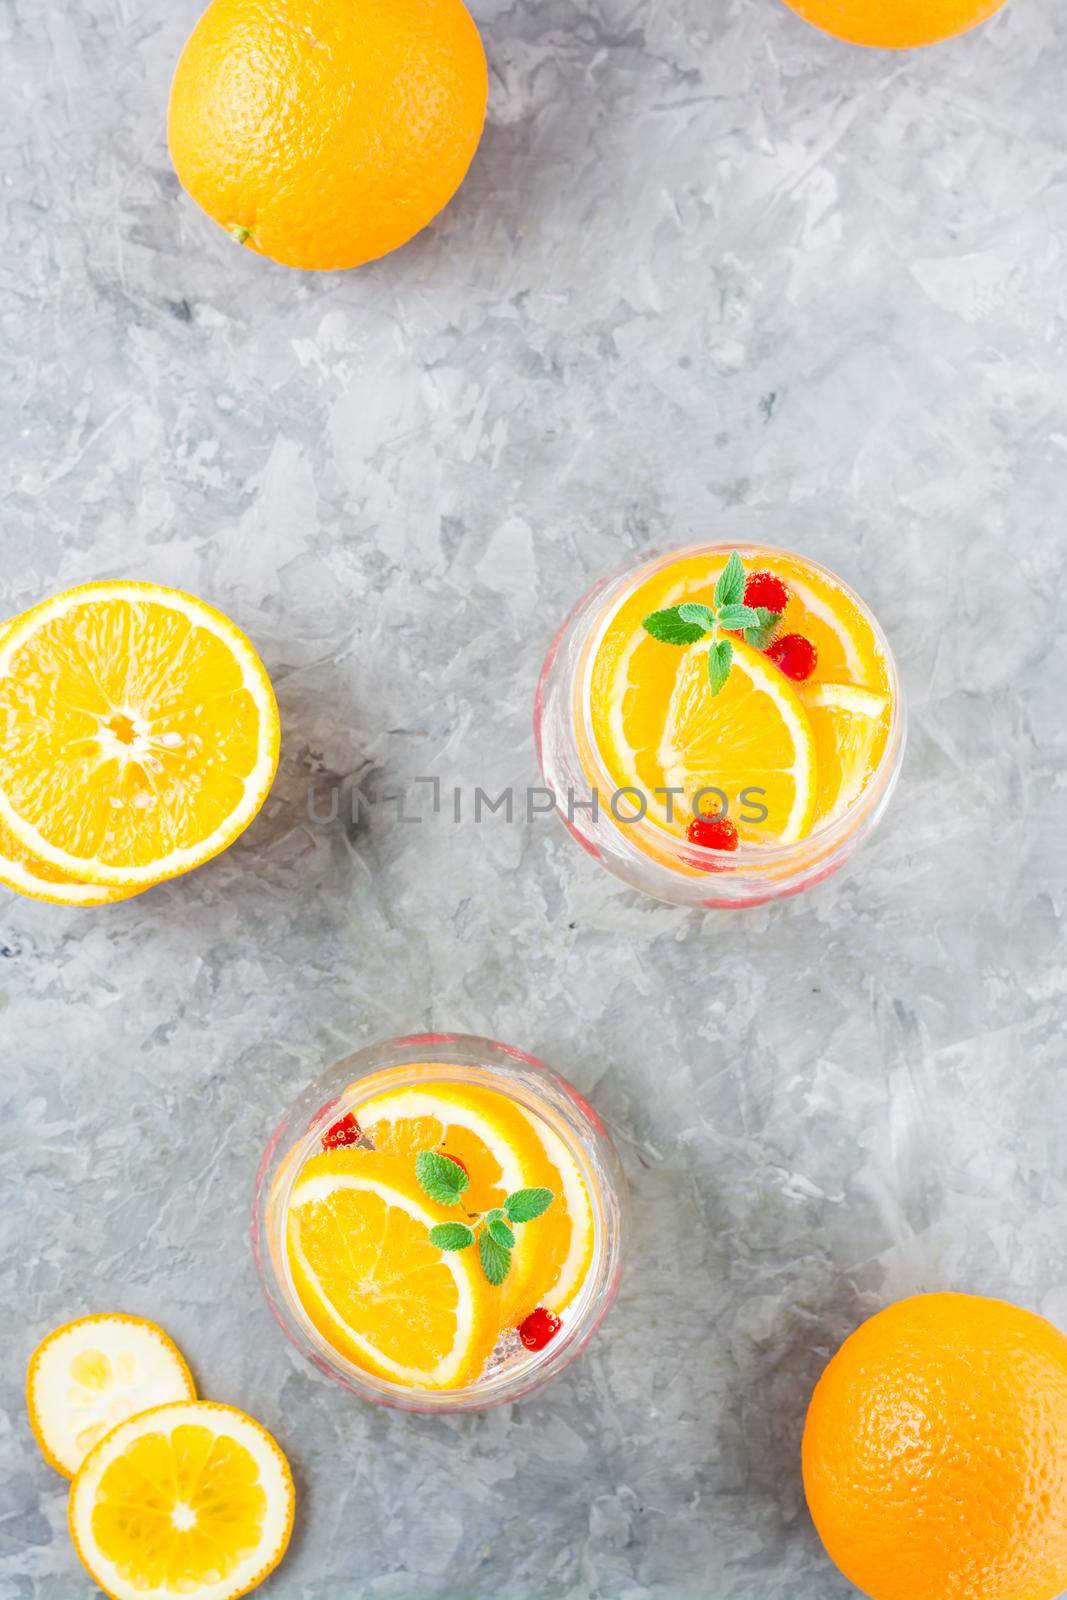 Hard seltzer cocktail with orange, cranberry and mint in glasses and cut oranges on the table. Alcoholic beverage. Vertical and top view by Aleruana